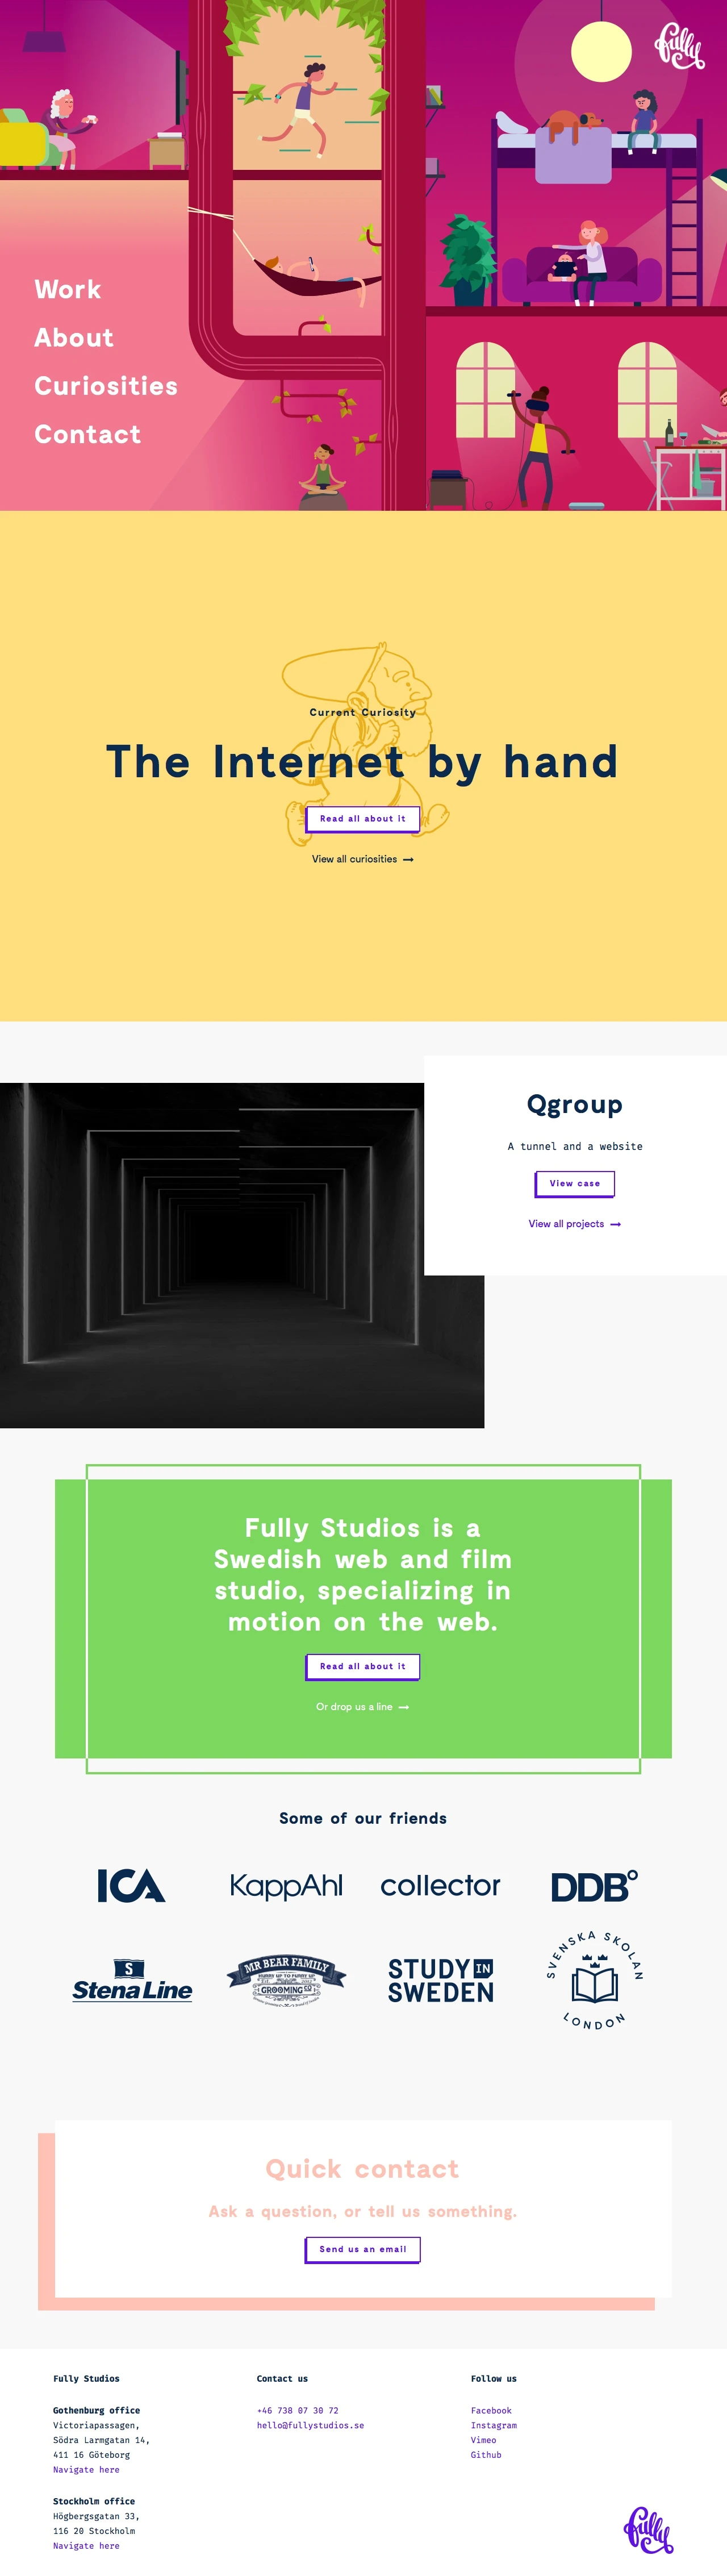 Fully Studios Landing Page Example: Fully Studios is a Swedish web and film studio, specializing in motion on the web.